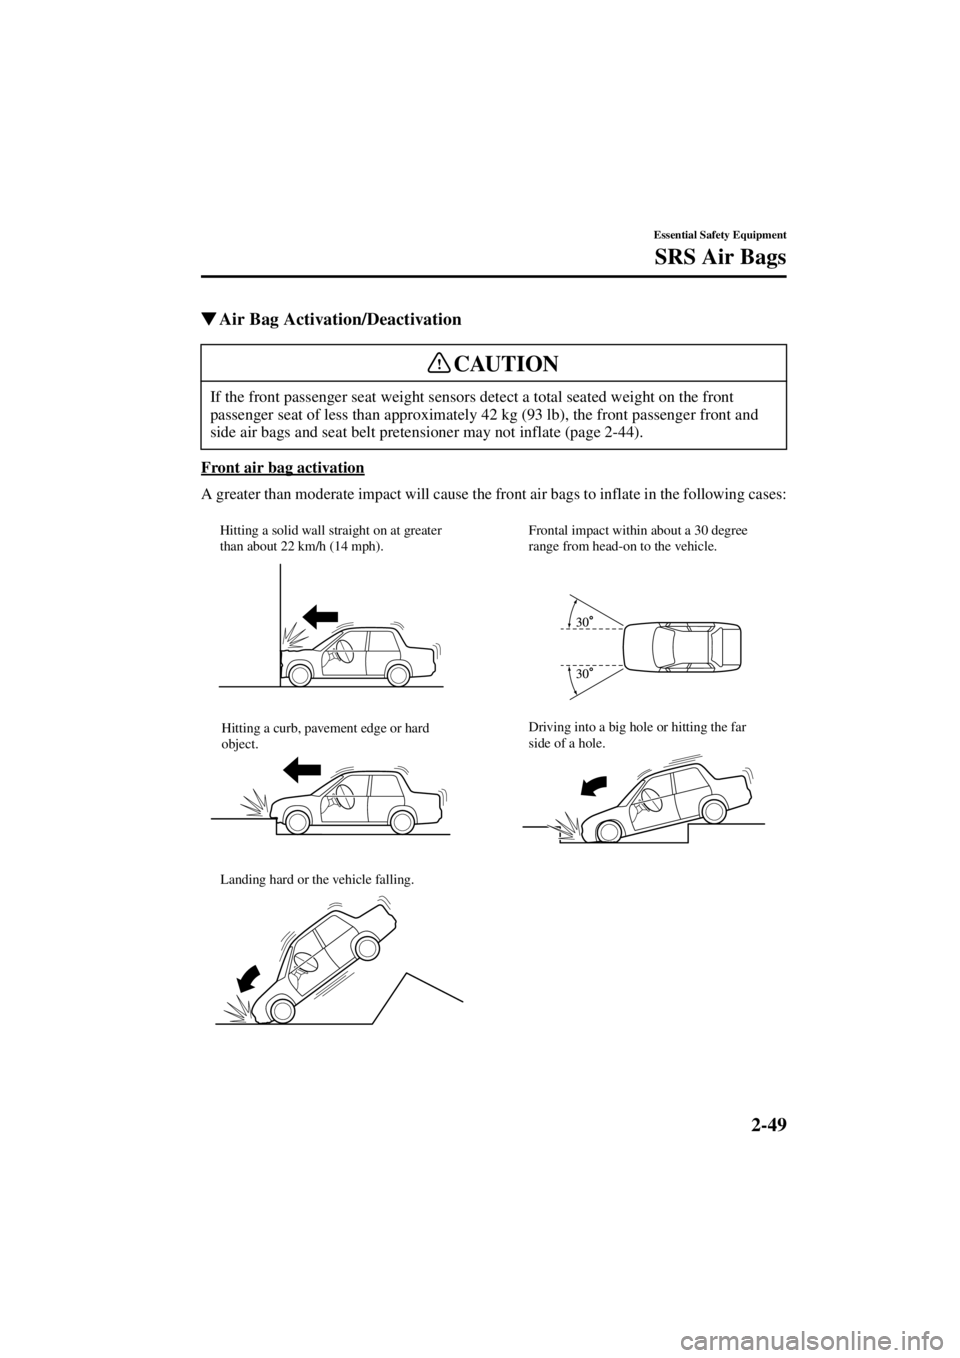 MAZDA MODEL 3 5-DOOR 2004 User Guide 2-49
Essential Safety Equipment
SRS Air Bags
Form No. 8S18-EA-03I
Air Bag Activation/Deactivation
Front air bag activation
A greater than moderate impact will cause the front air bags to inflate in t